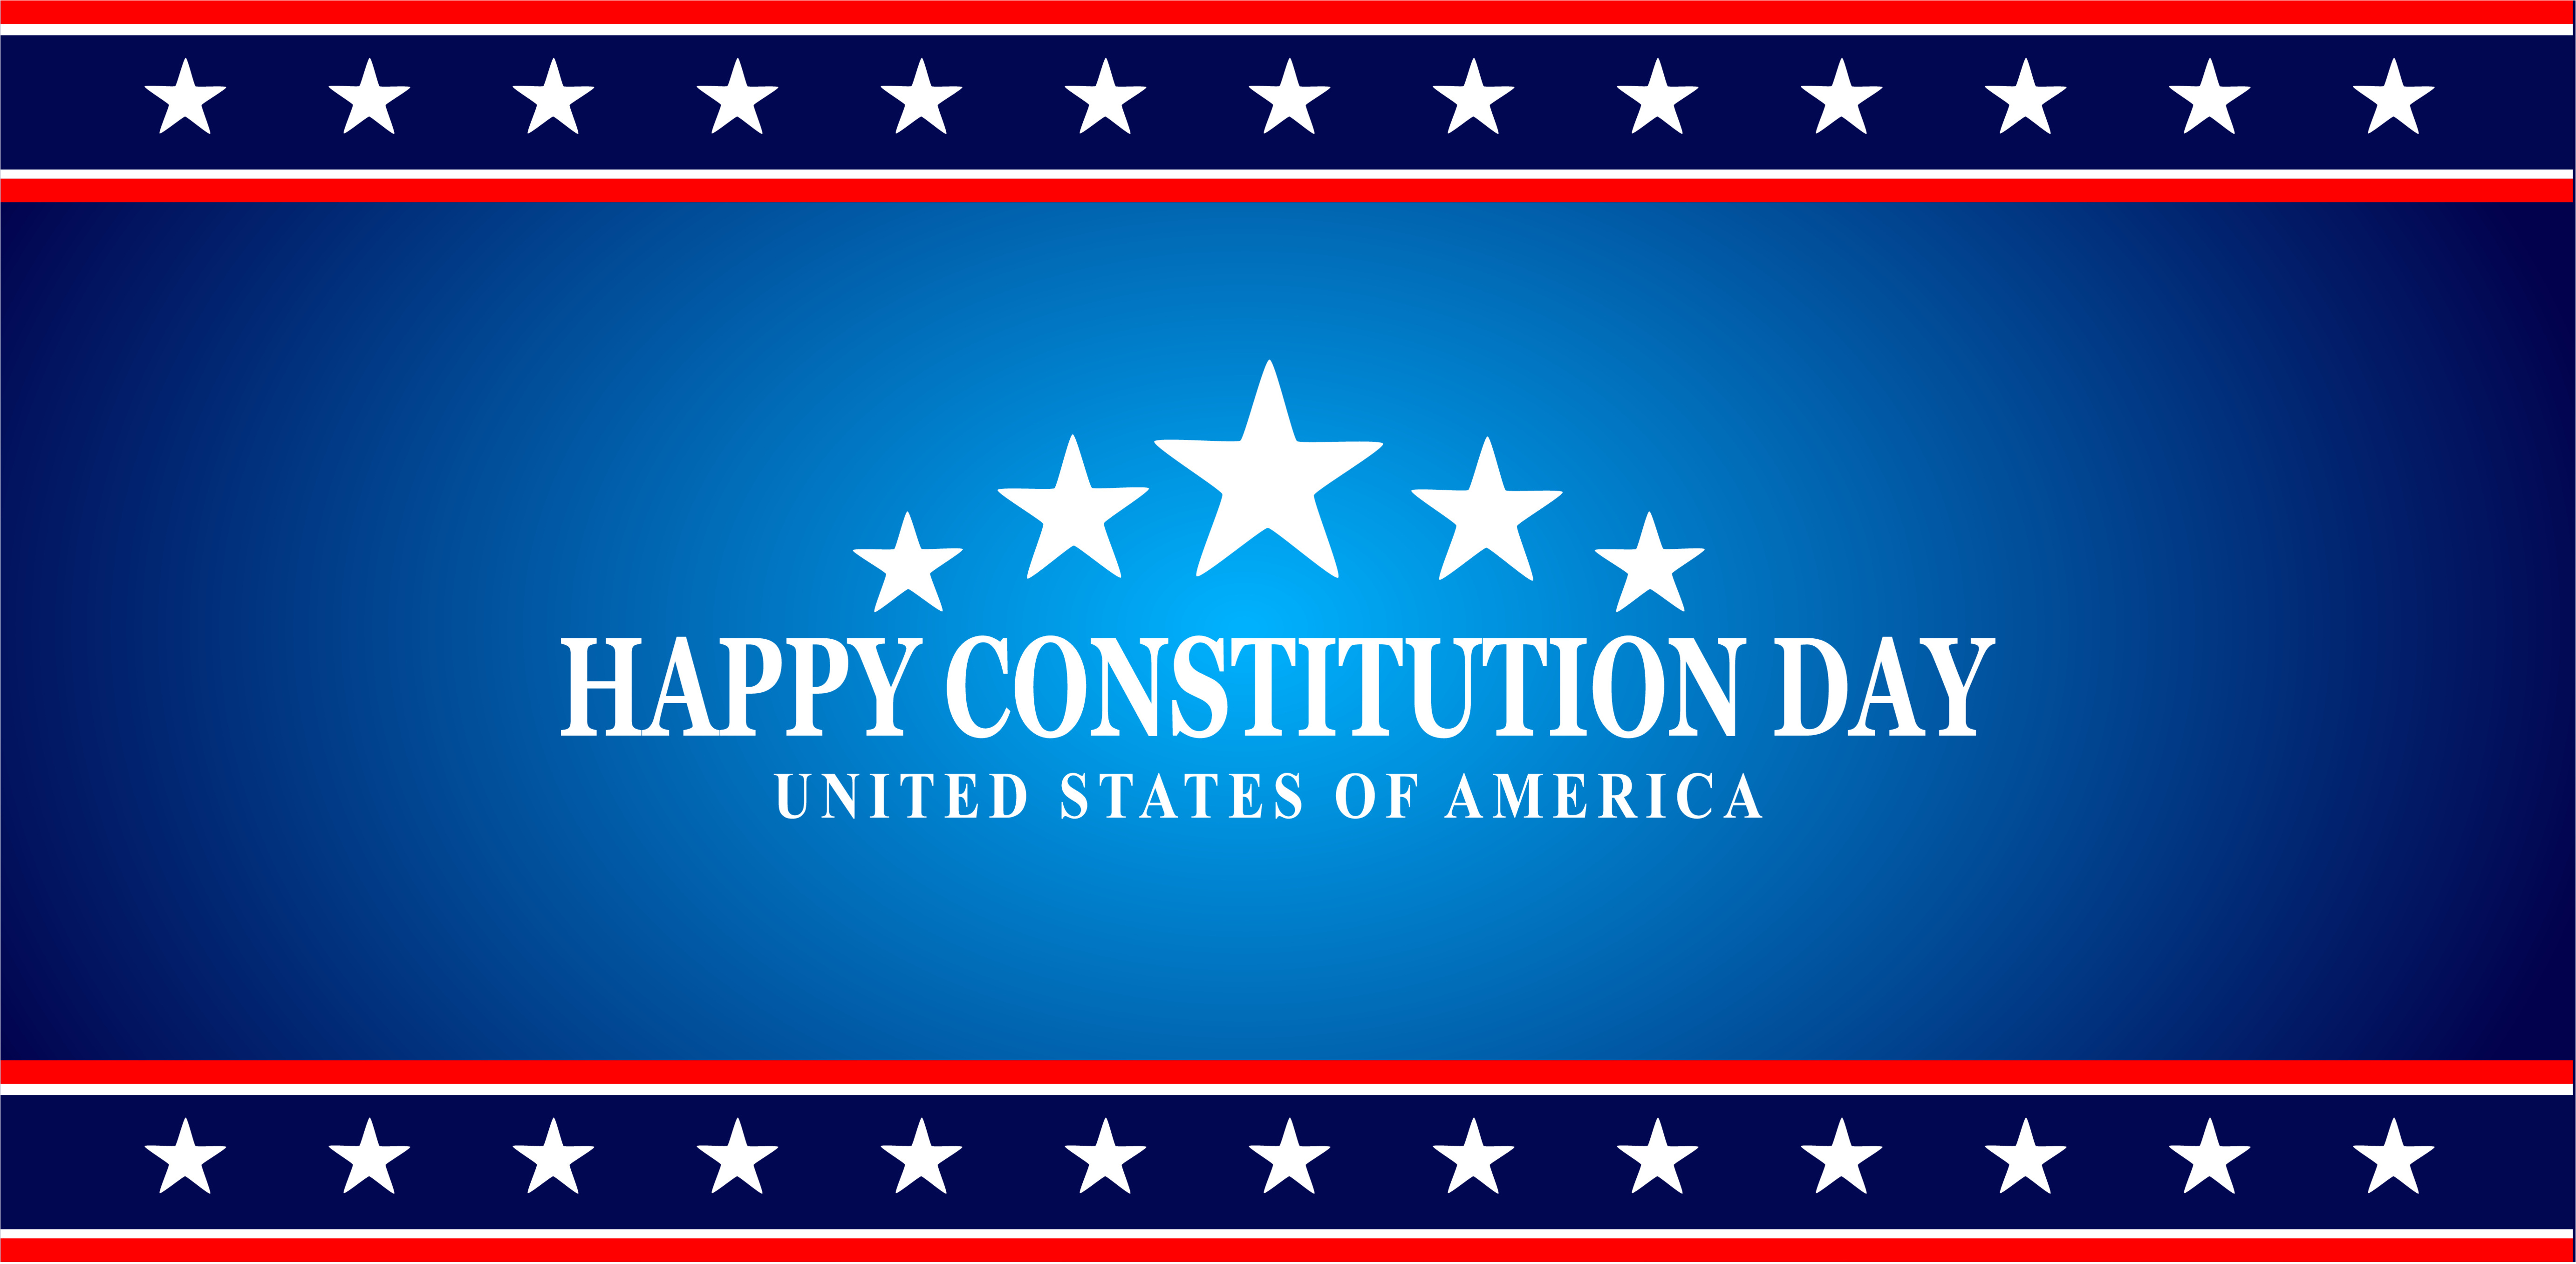 Happy Constitution Day banner